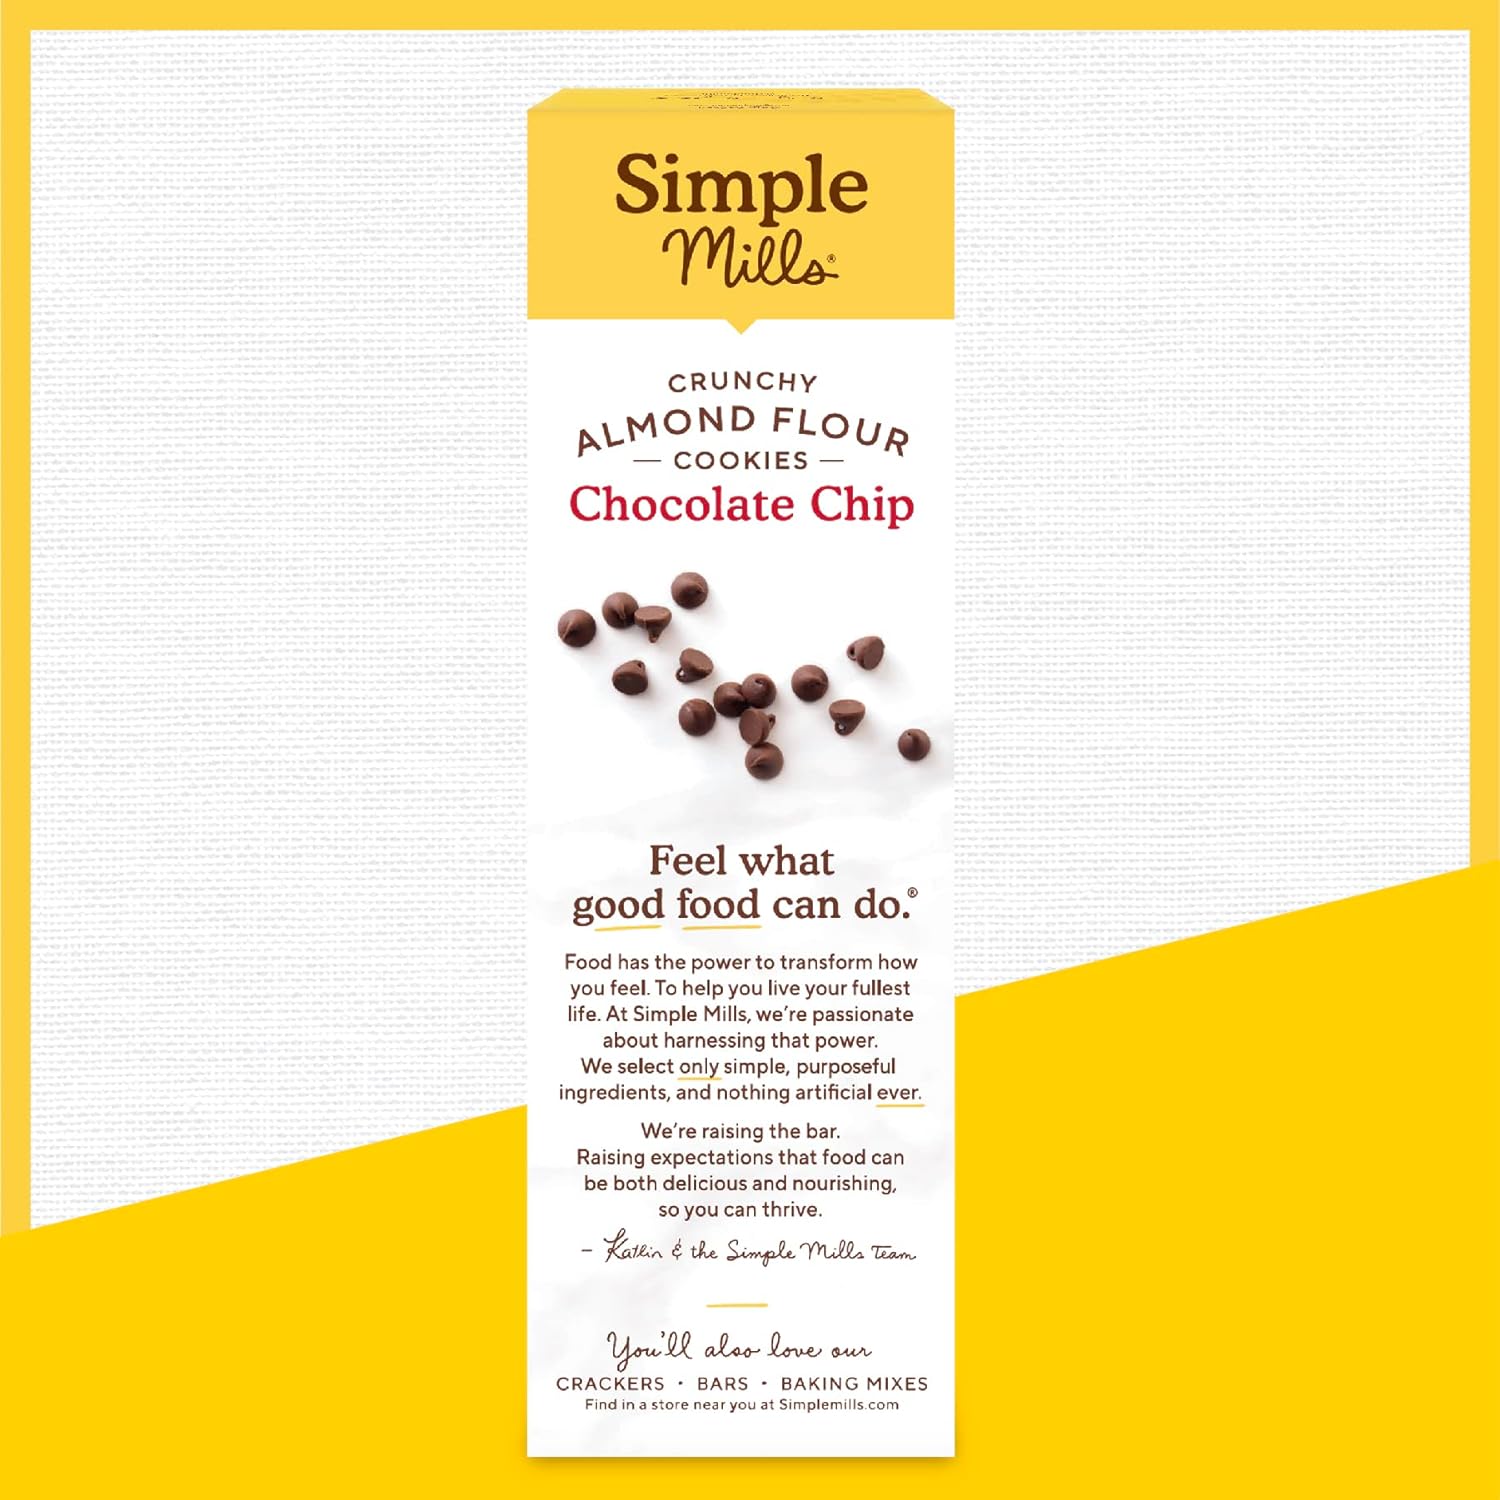 Simple Mills Almond Flour Crunchy Cookies, Chocolate Chip - Gluten Free, Vegan, Healthy Snacks, Made with Organic Coconut Oil, 5.5 Ounce (Pack of 6) : Grocery & Gourmet Food